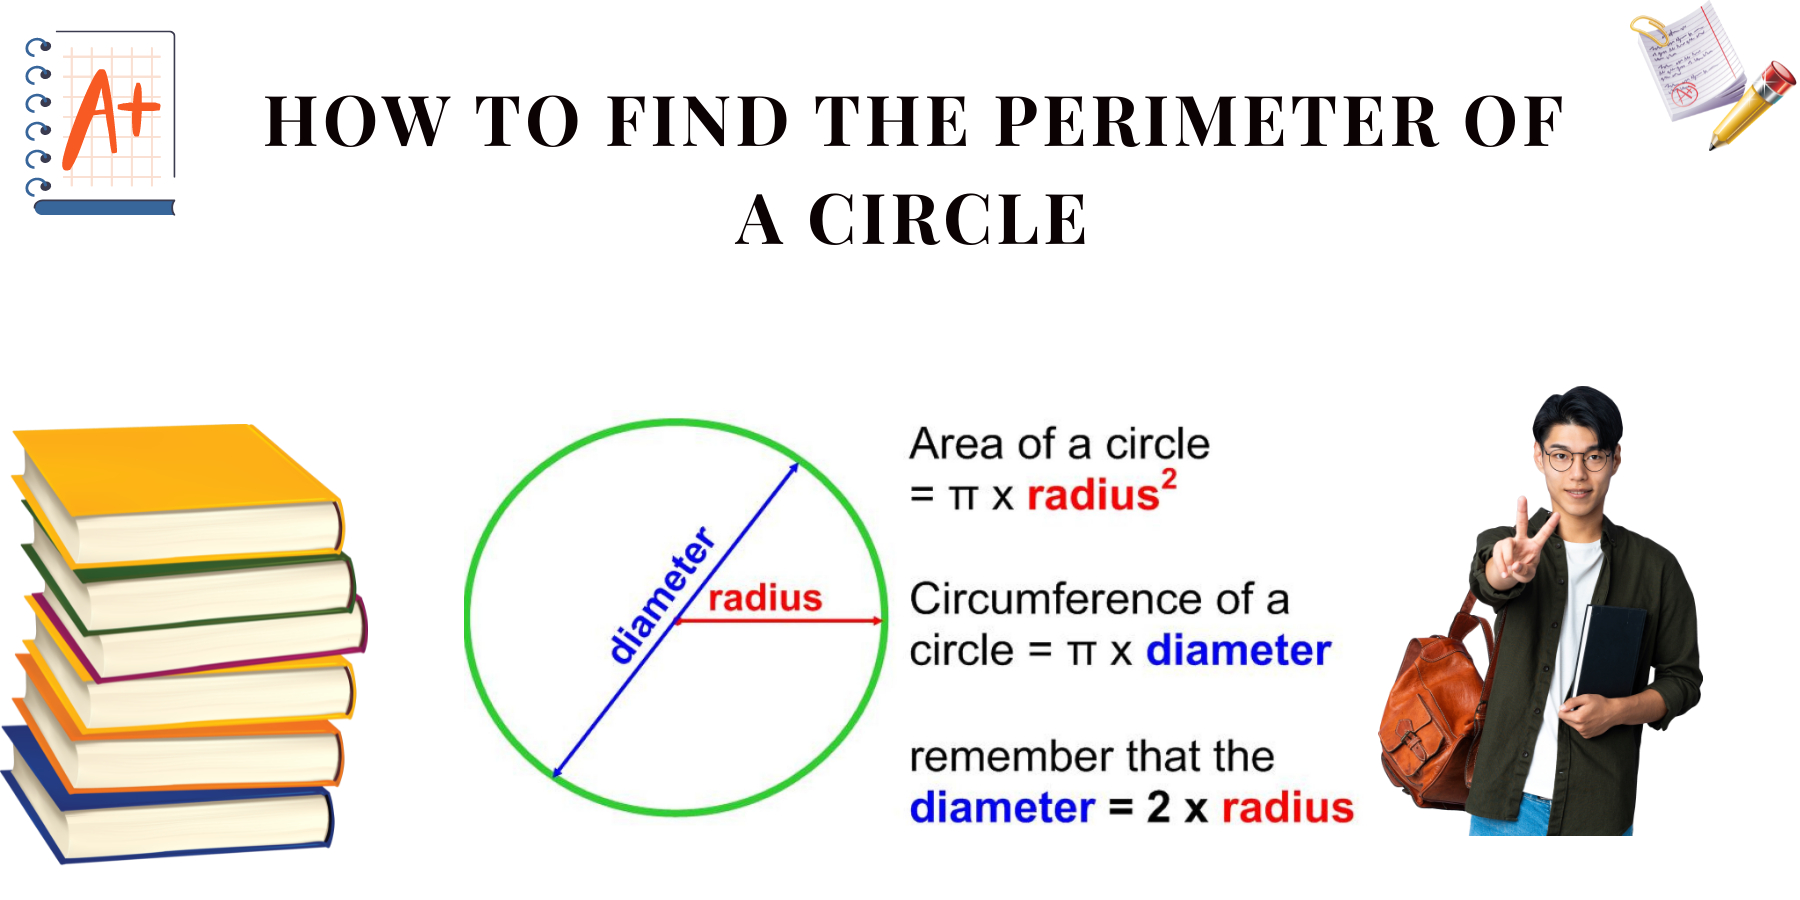 How-To-Calculate-The-Perimeter-Of-A-Circle.jpeg